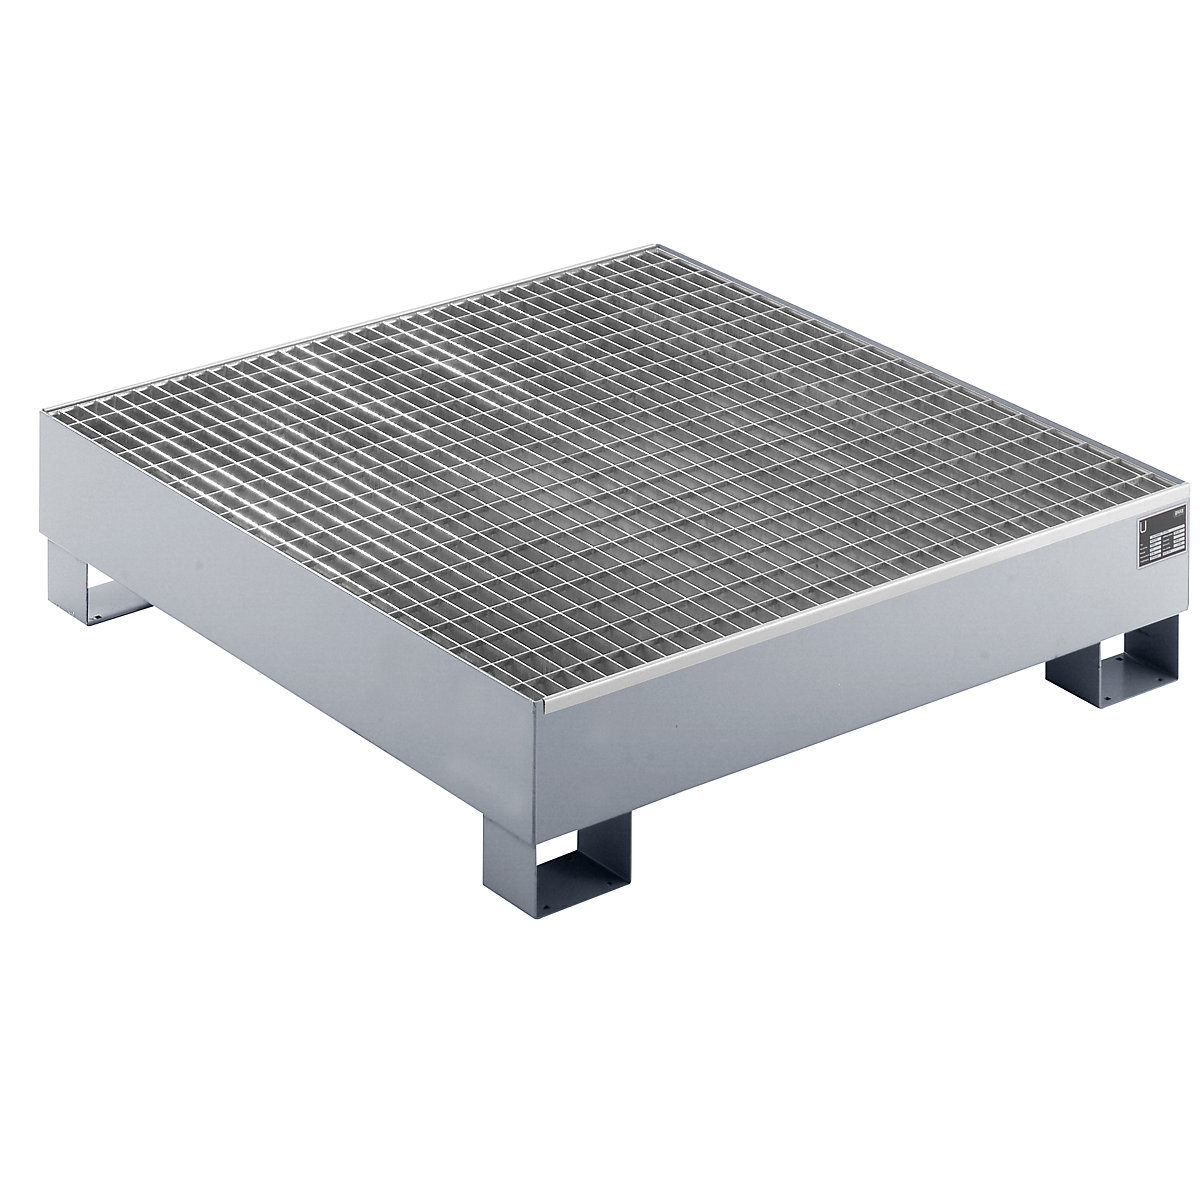 EUROKRAFTbasic – Sump tray made from sheet steel, LxWxH 1200 x 1200 x 285 mm, hot dip galvanised, with grate